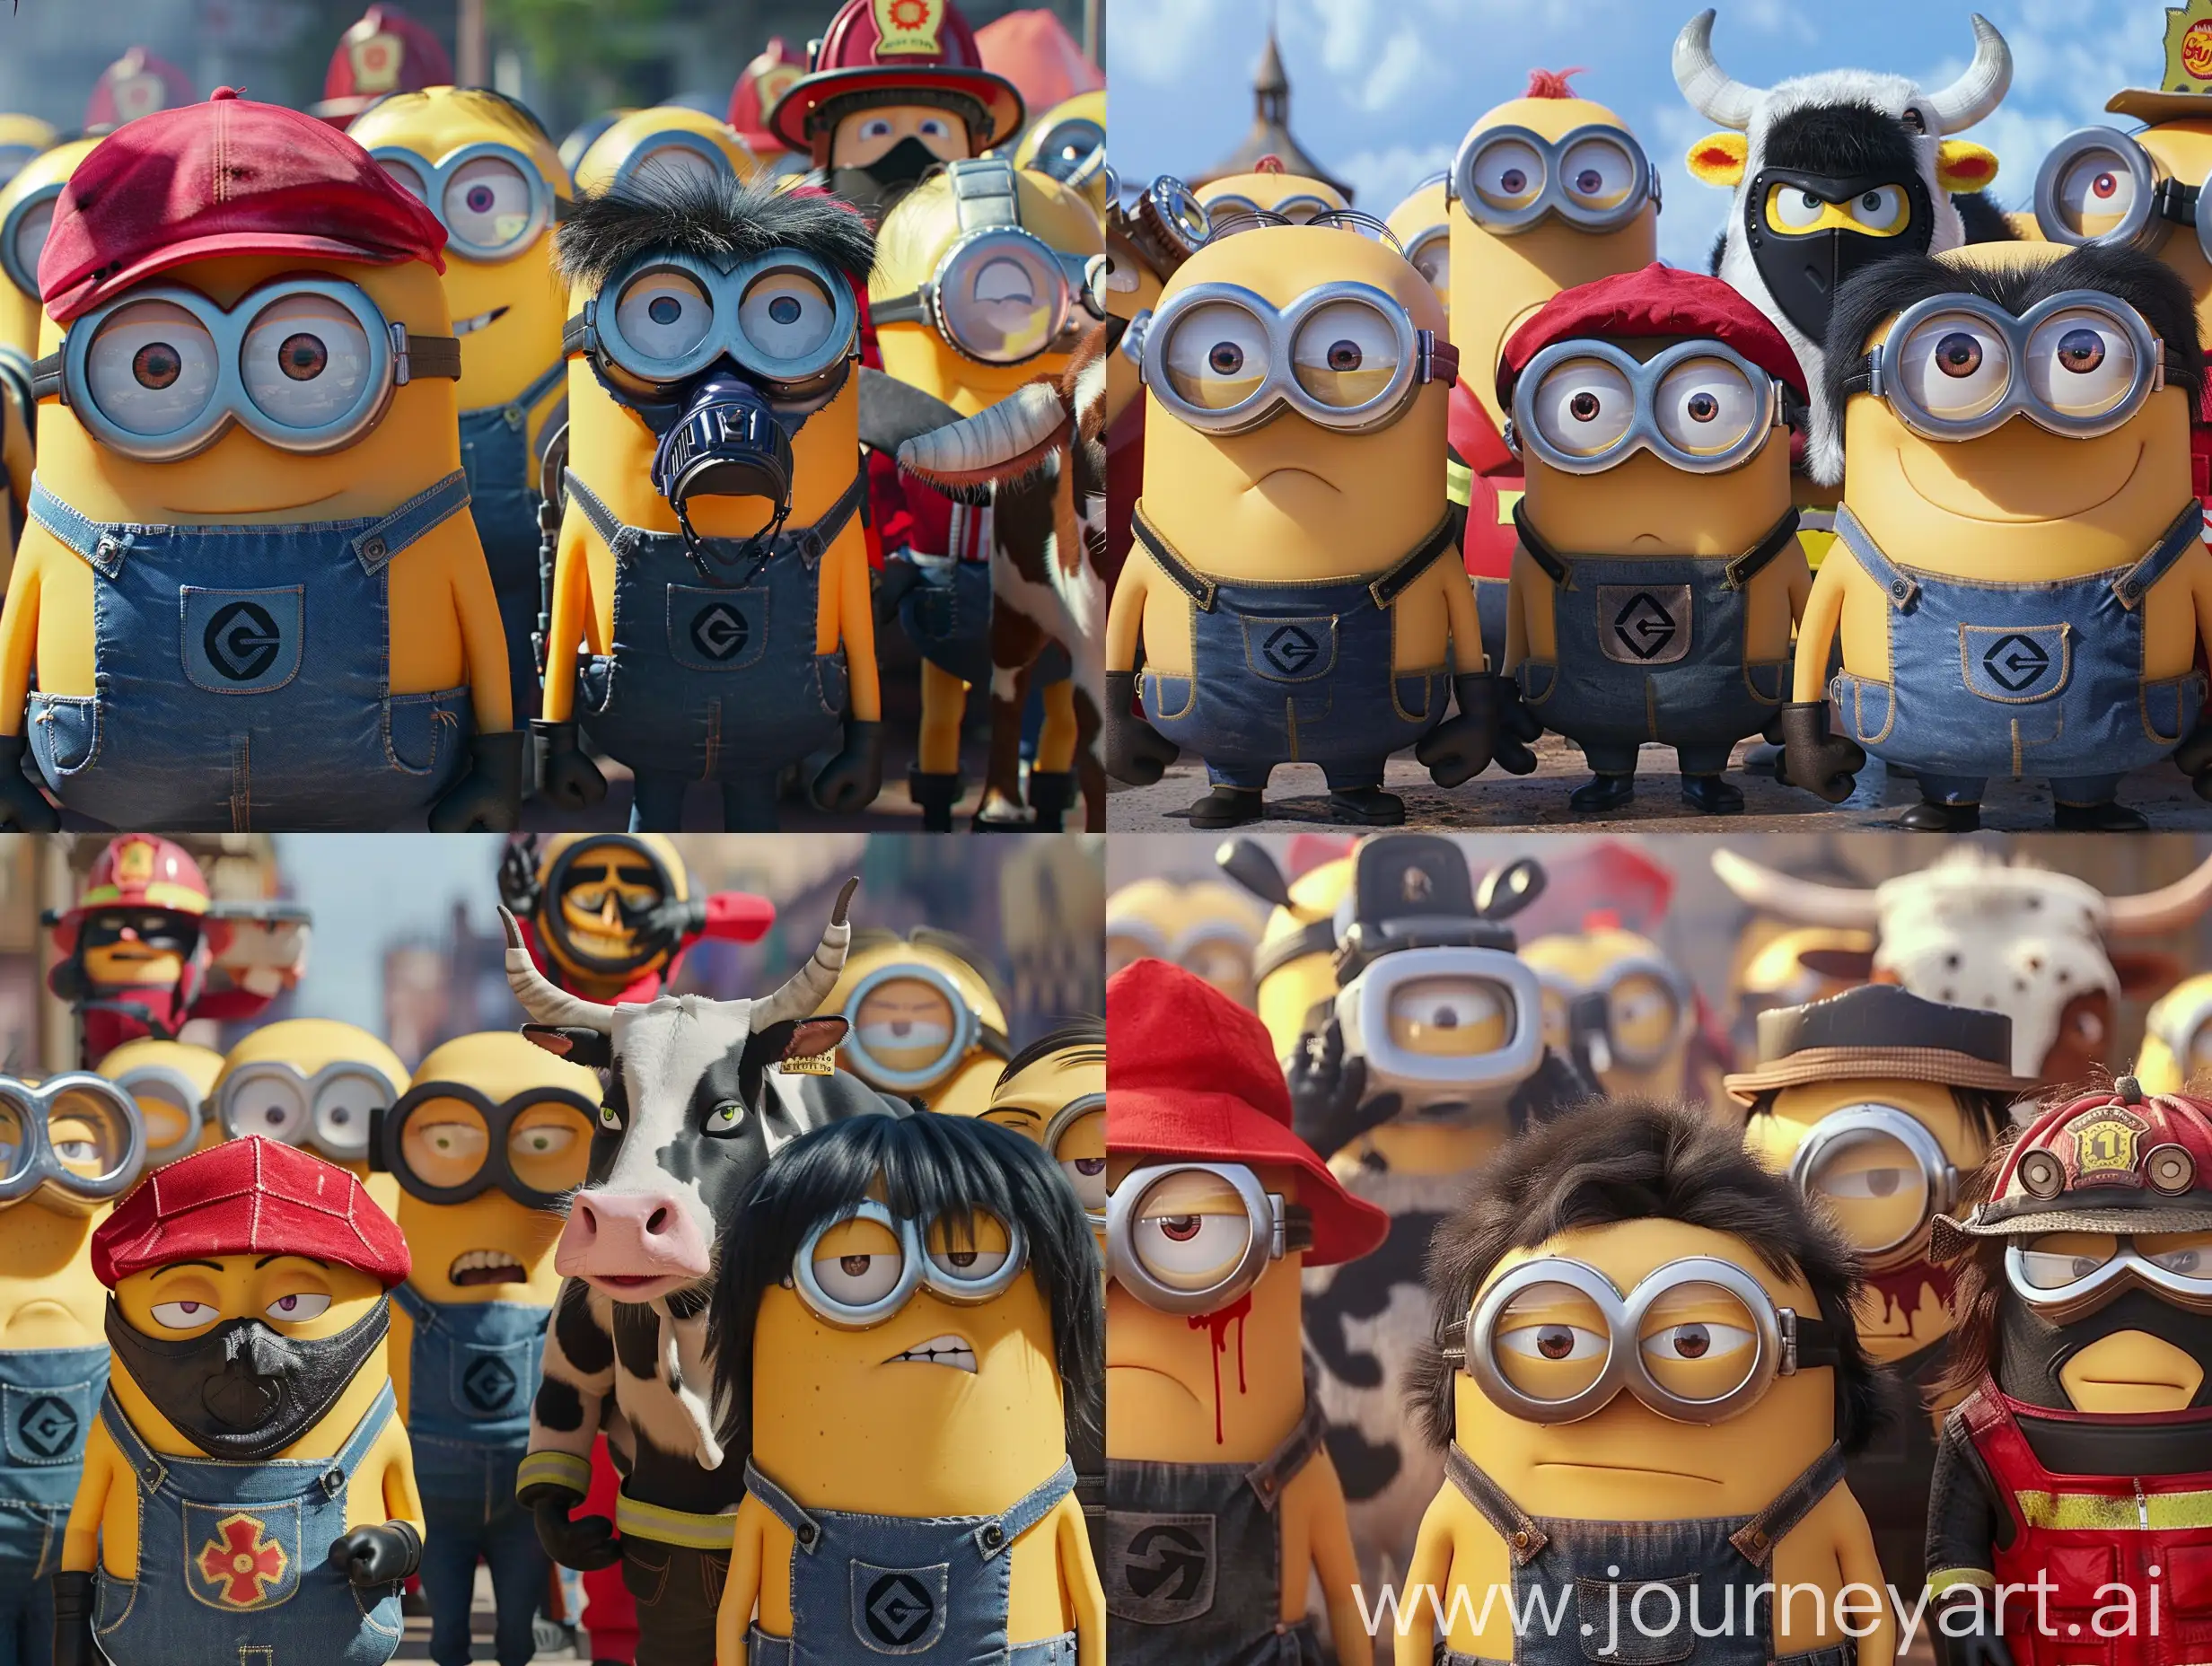 Colorful-Minion-Team-with-Various-Costumes-Standing-Together